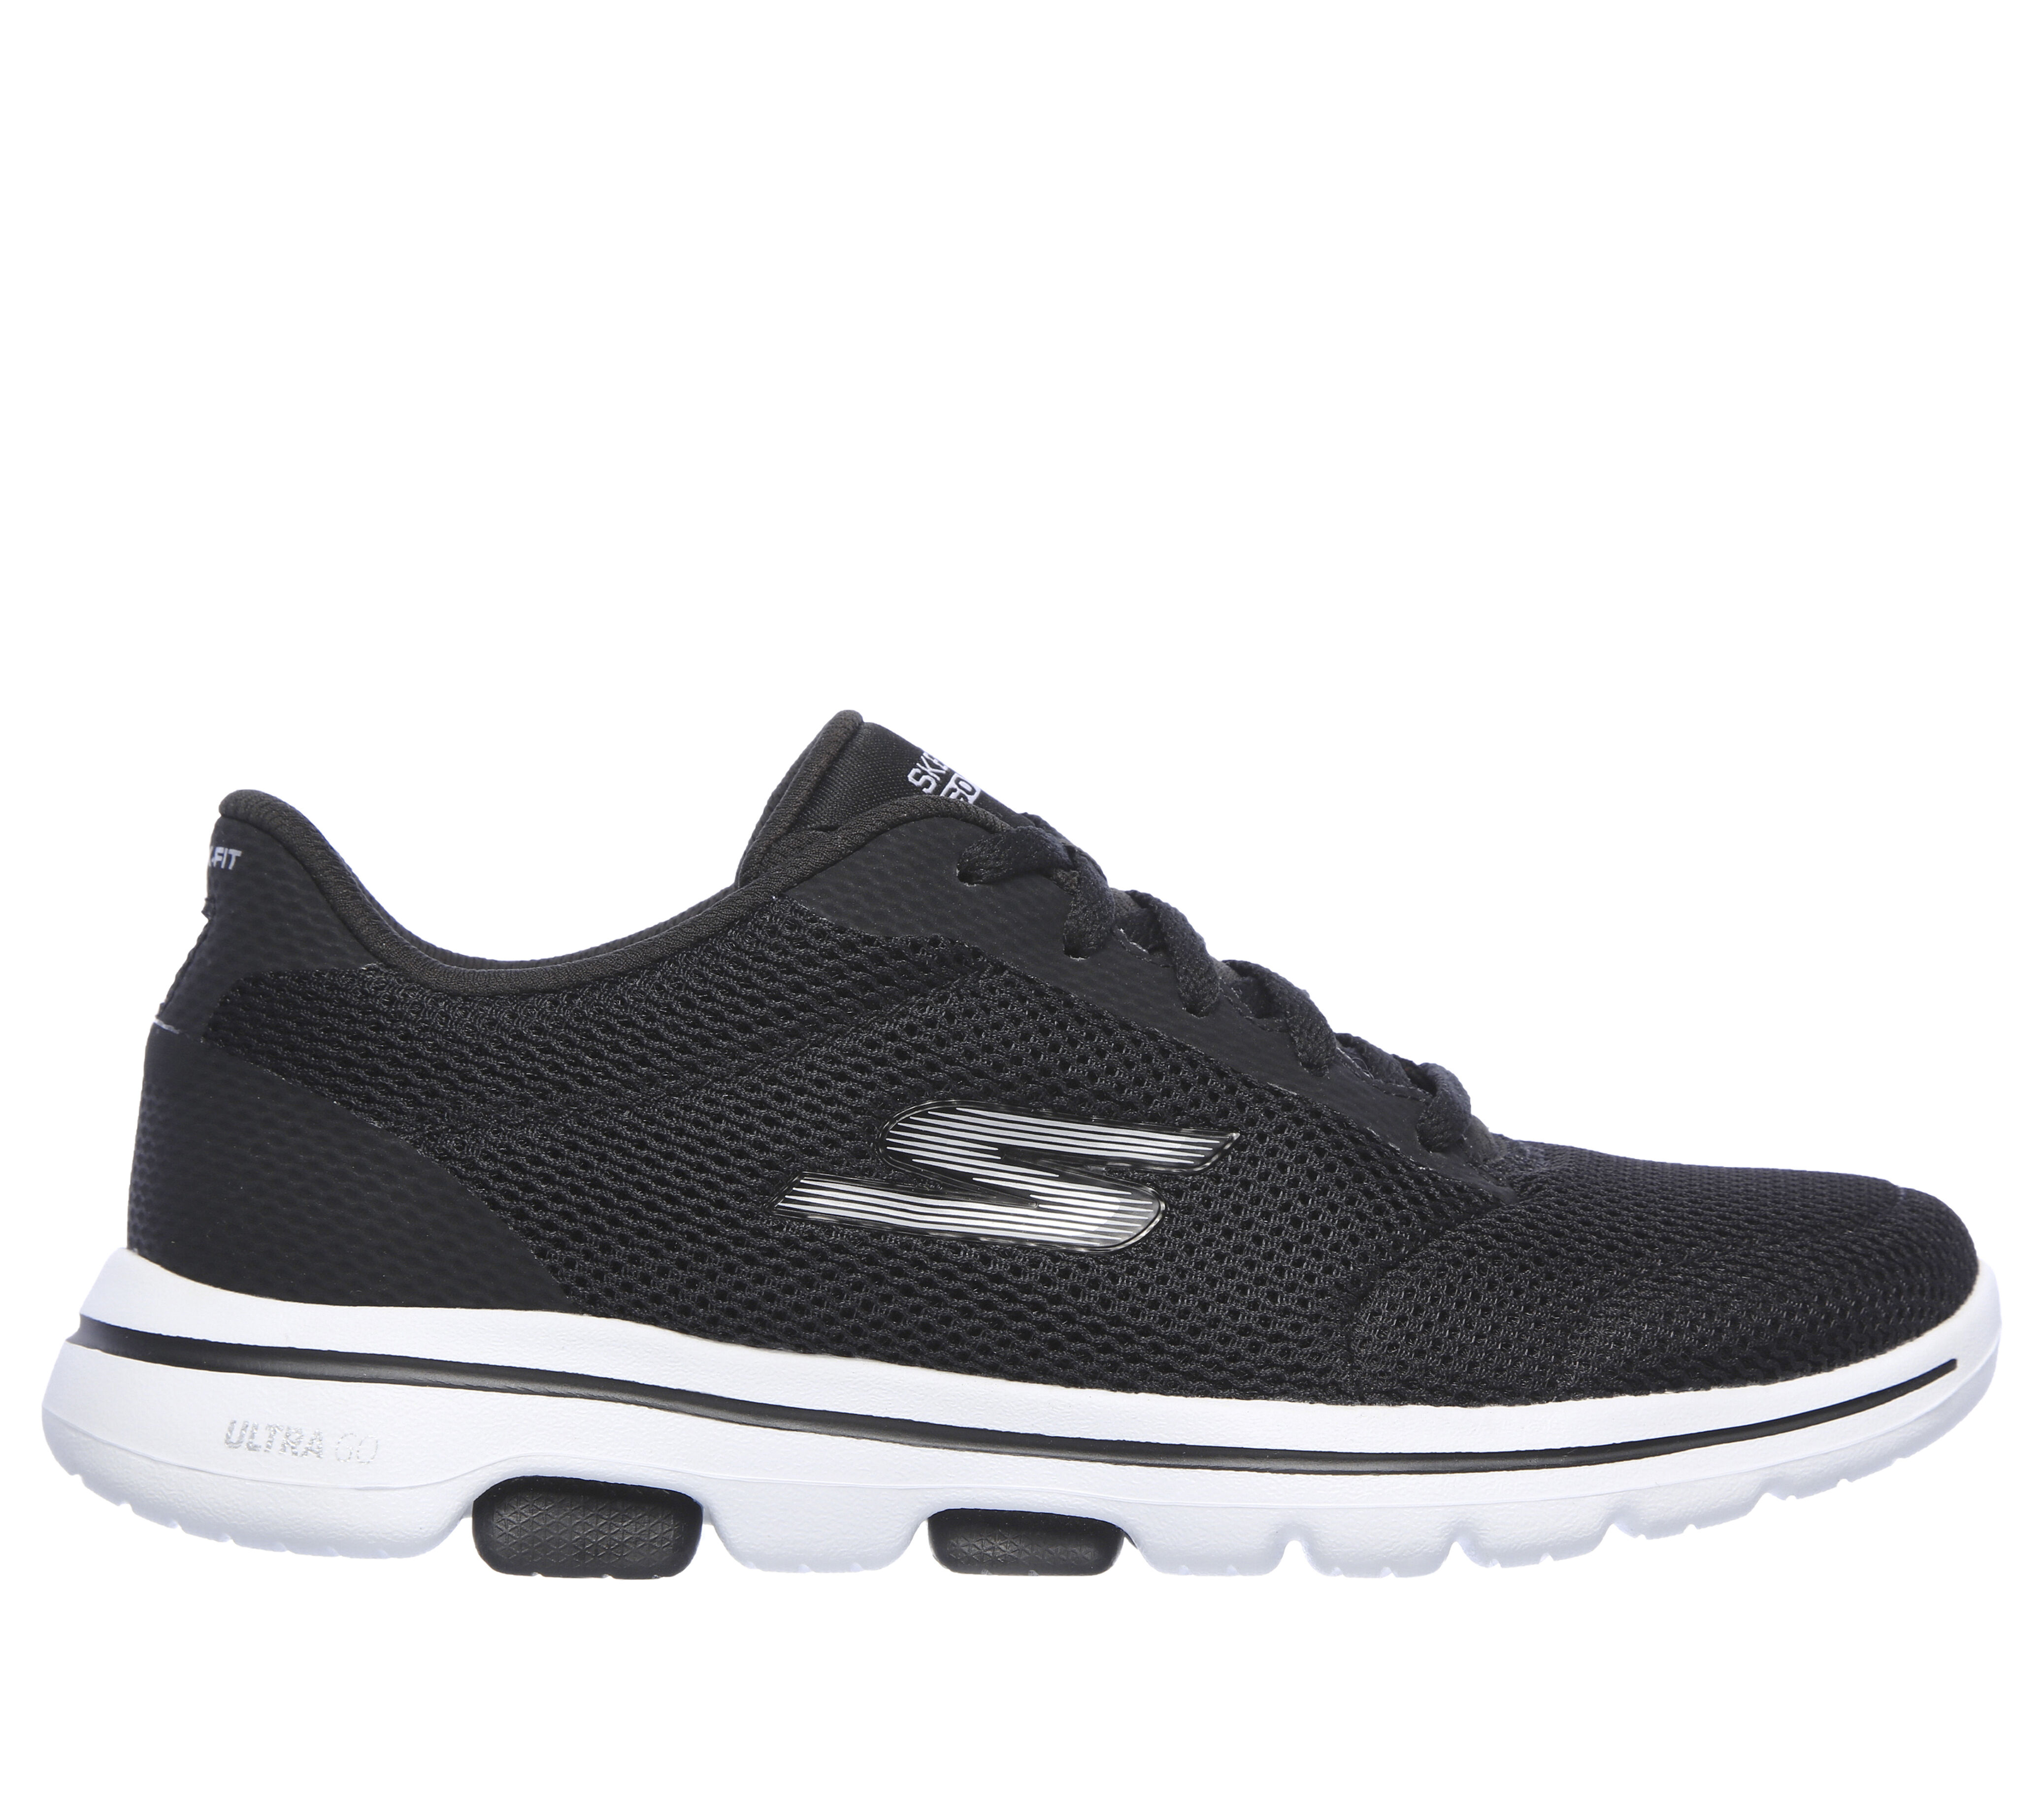 sketchers for women clearance